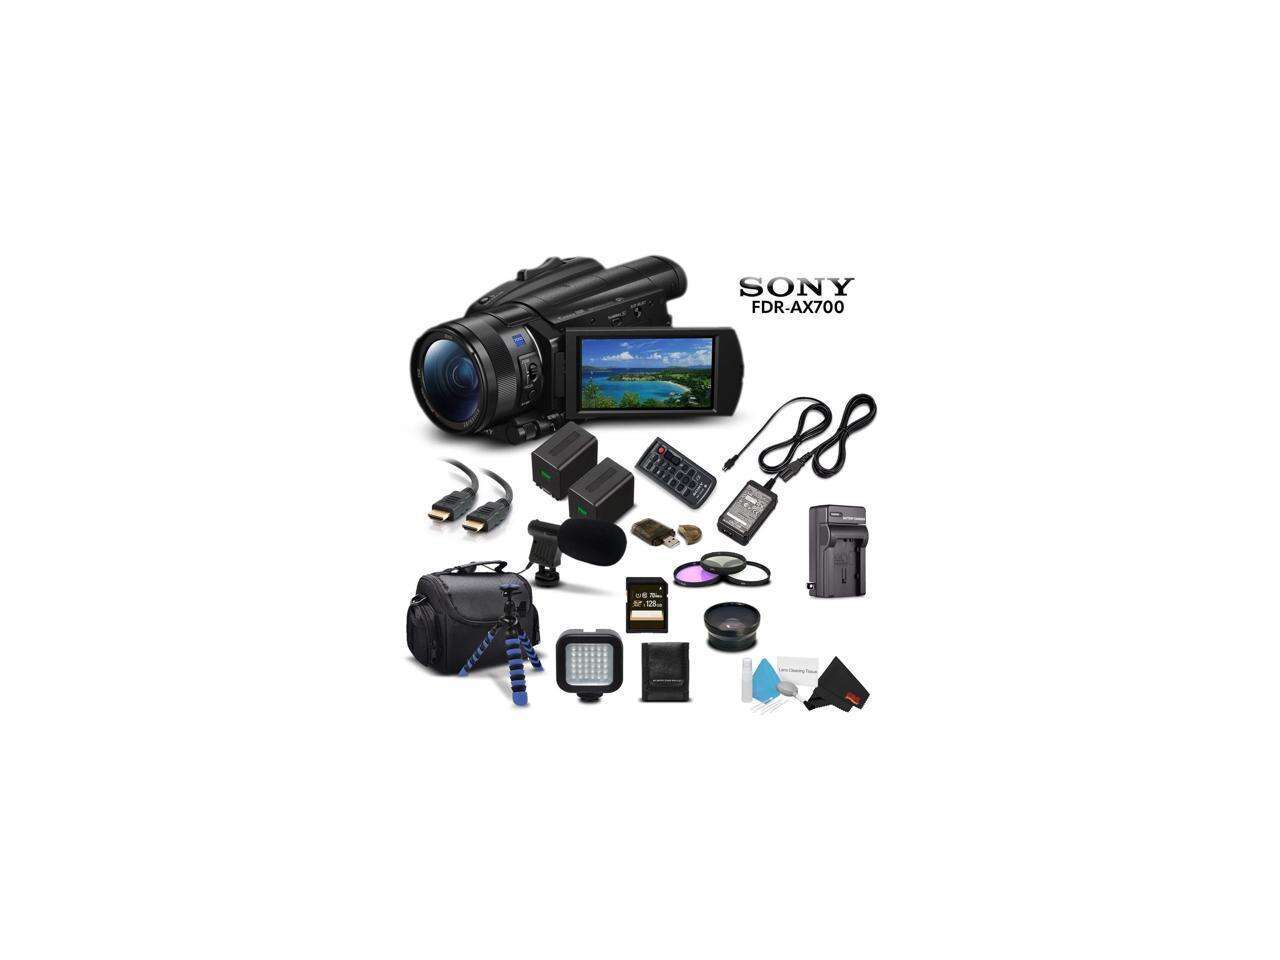 Sony Handycam FDR-AX700 4K HD Video Camera Camcorder Intl Model + Extra Battery and Charger + 3 Piece Filter Kit + Wide Angle Lens + Case + Tripod and More - Advanced Bundle